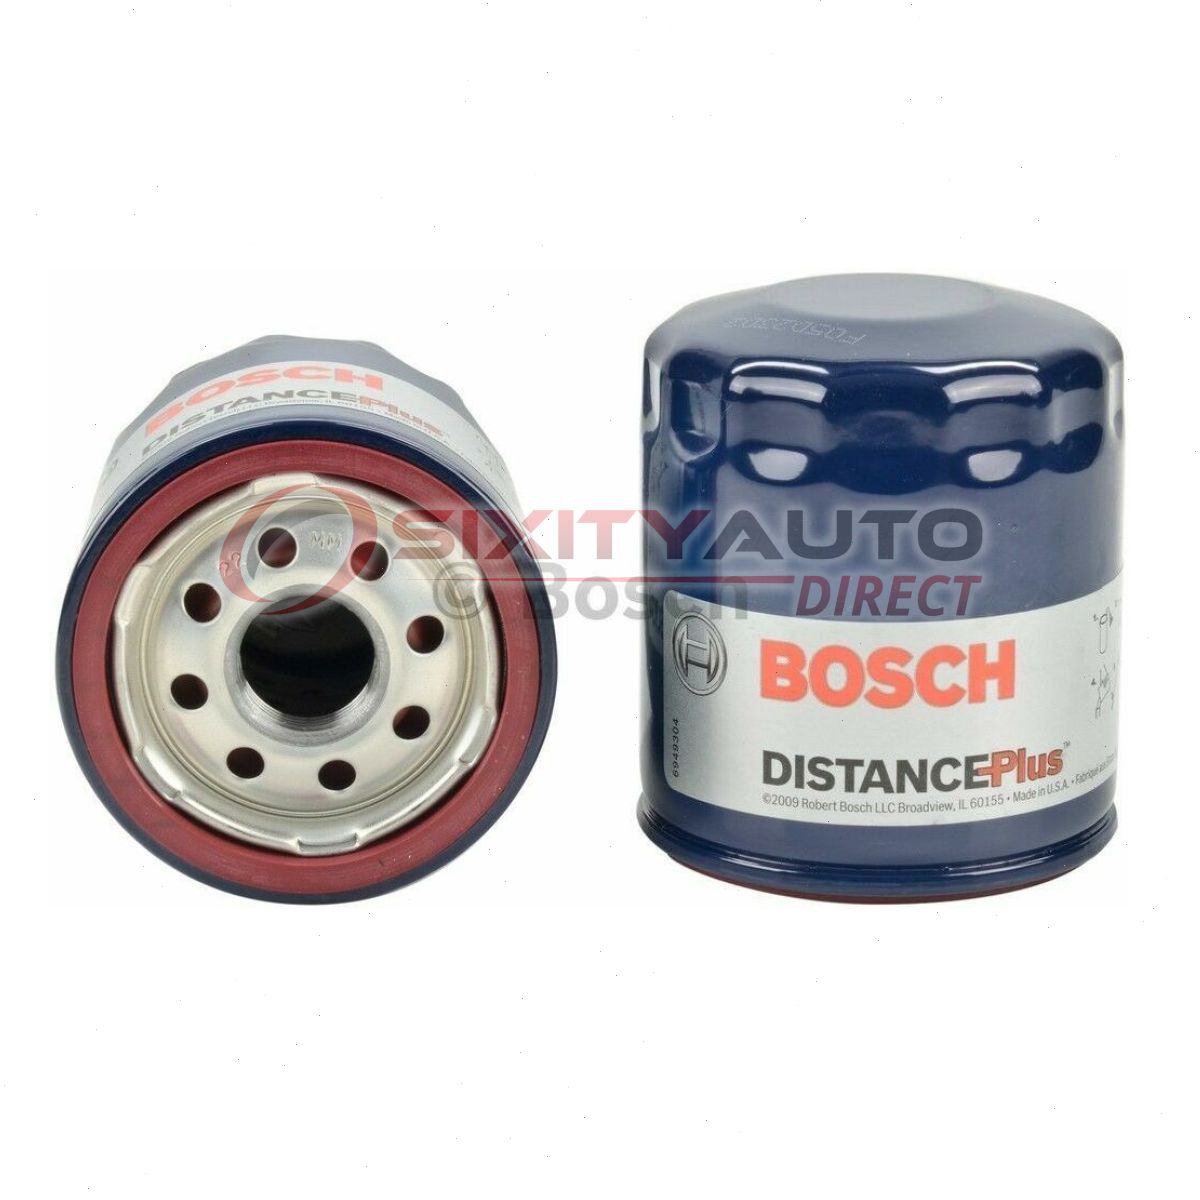 Bosch Distance Plus Oil Filter for 2010 Chrysler Town & Country 4.0L V6 - na | eBay 2010 Chrysler Town And Country 4.0 Oil Filter